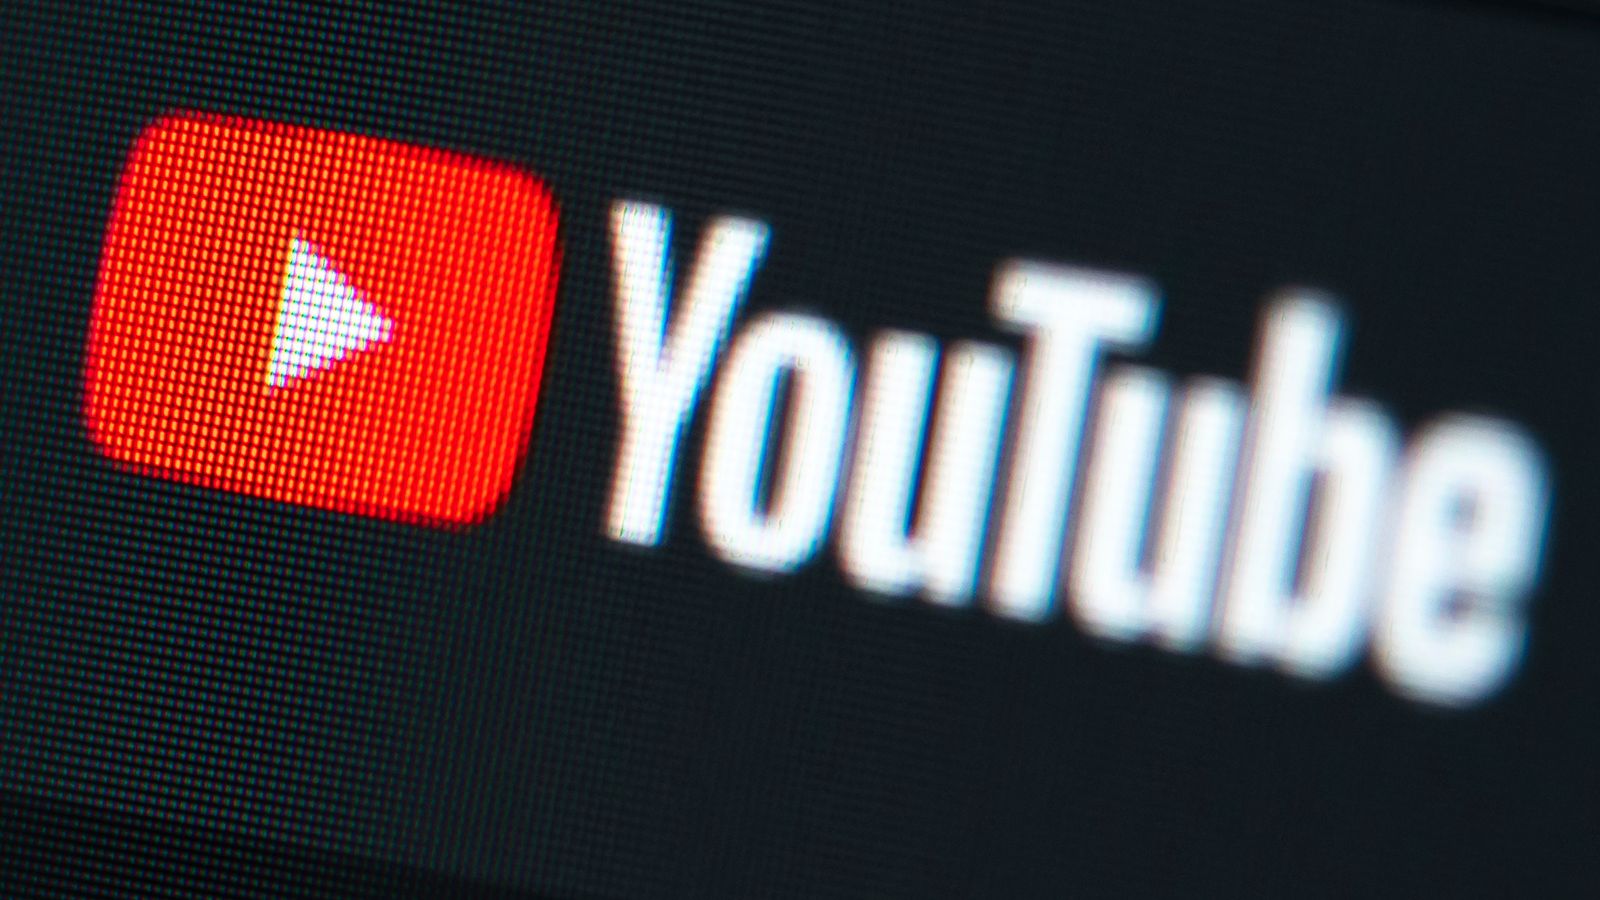 YouTube warns of email scam from seemingly authentic account | Science &  Tech News | Sky News